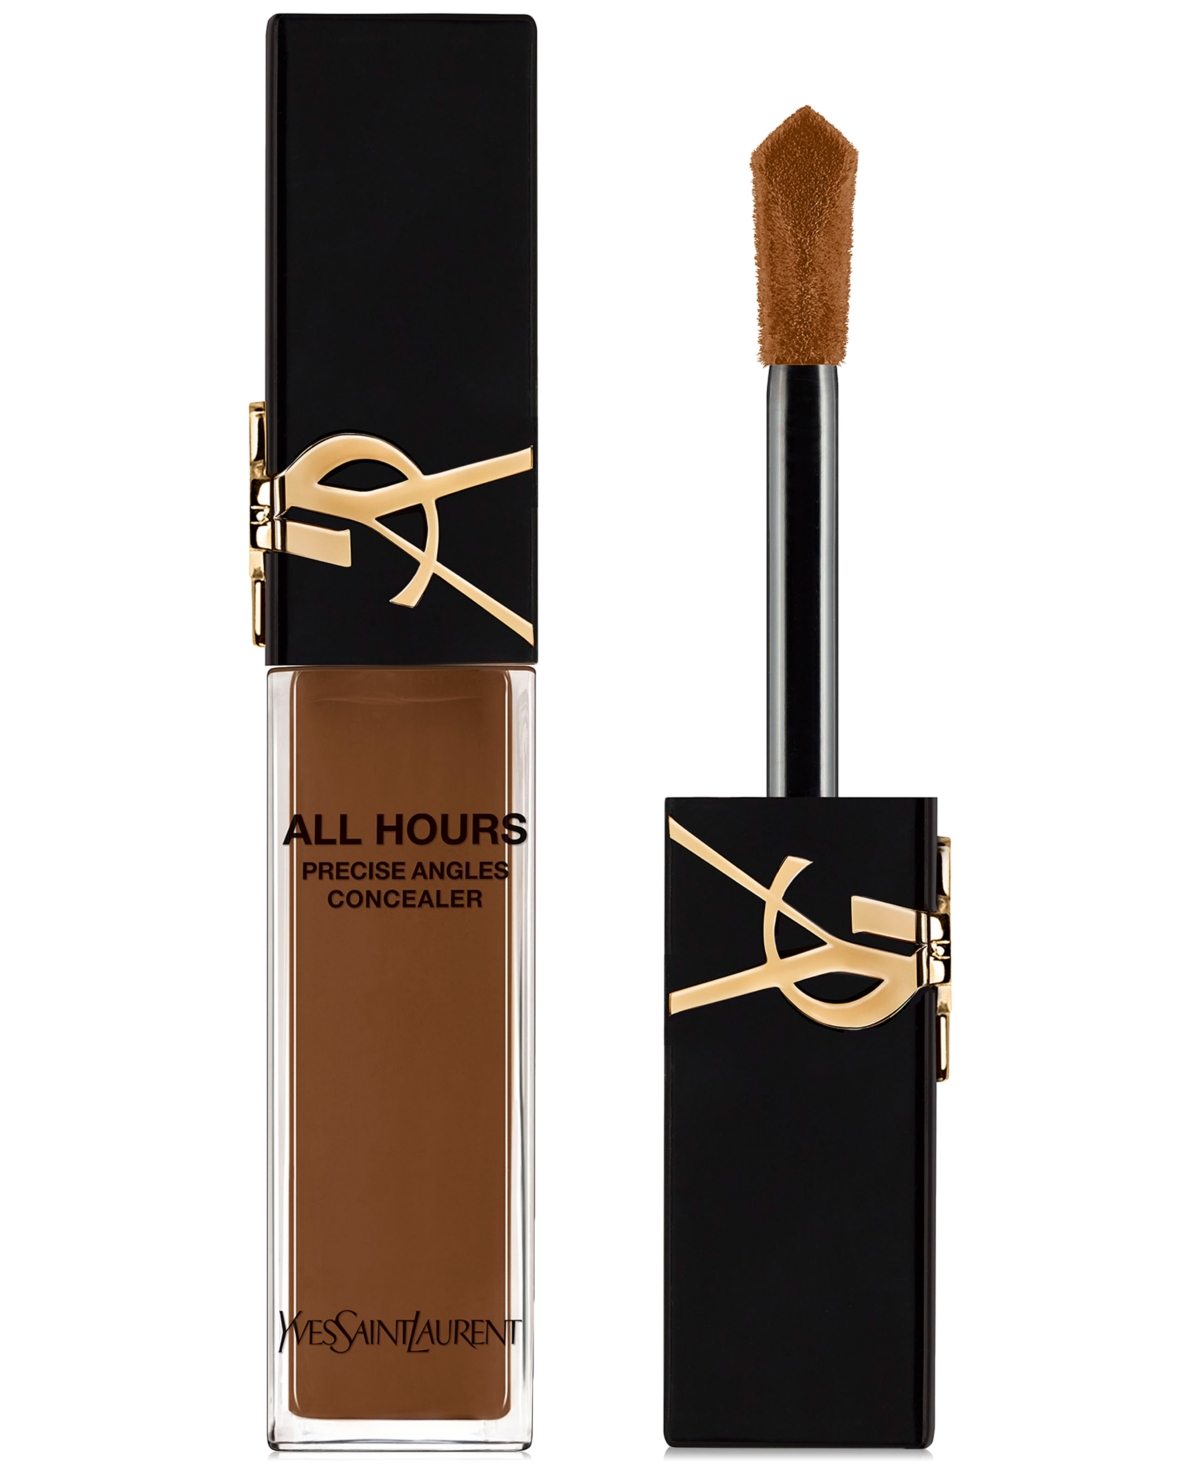 Saint Laurent All Hours Precise Angles Full-coverage Concealer In Deep Shade With Warm Undertones